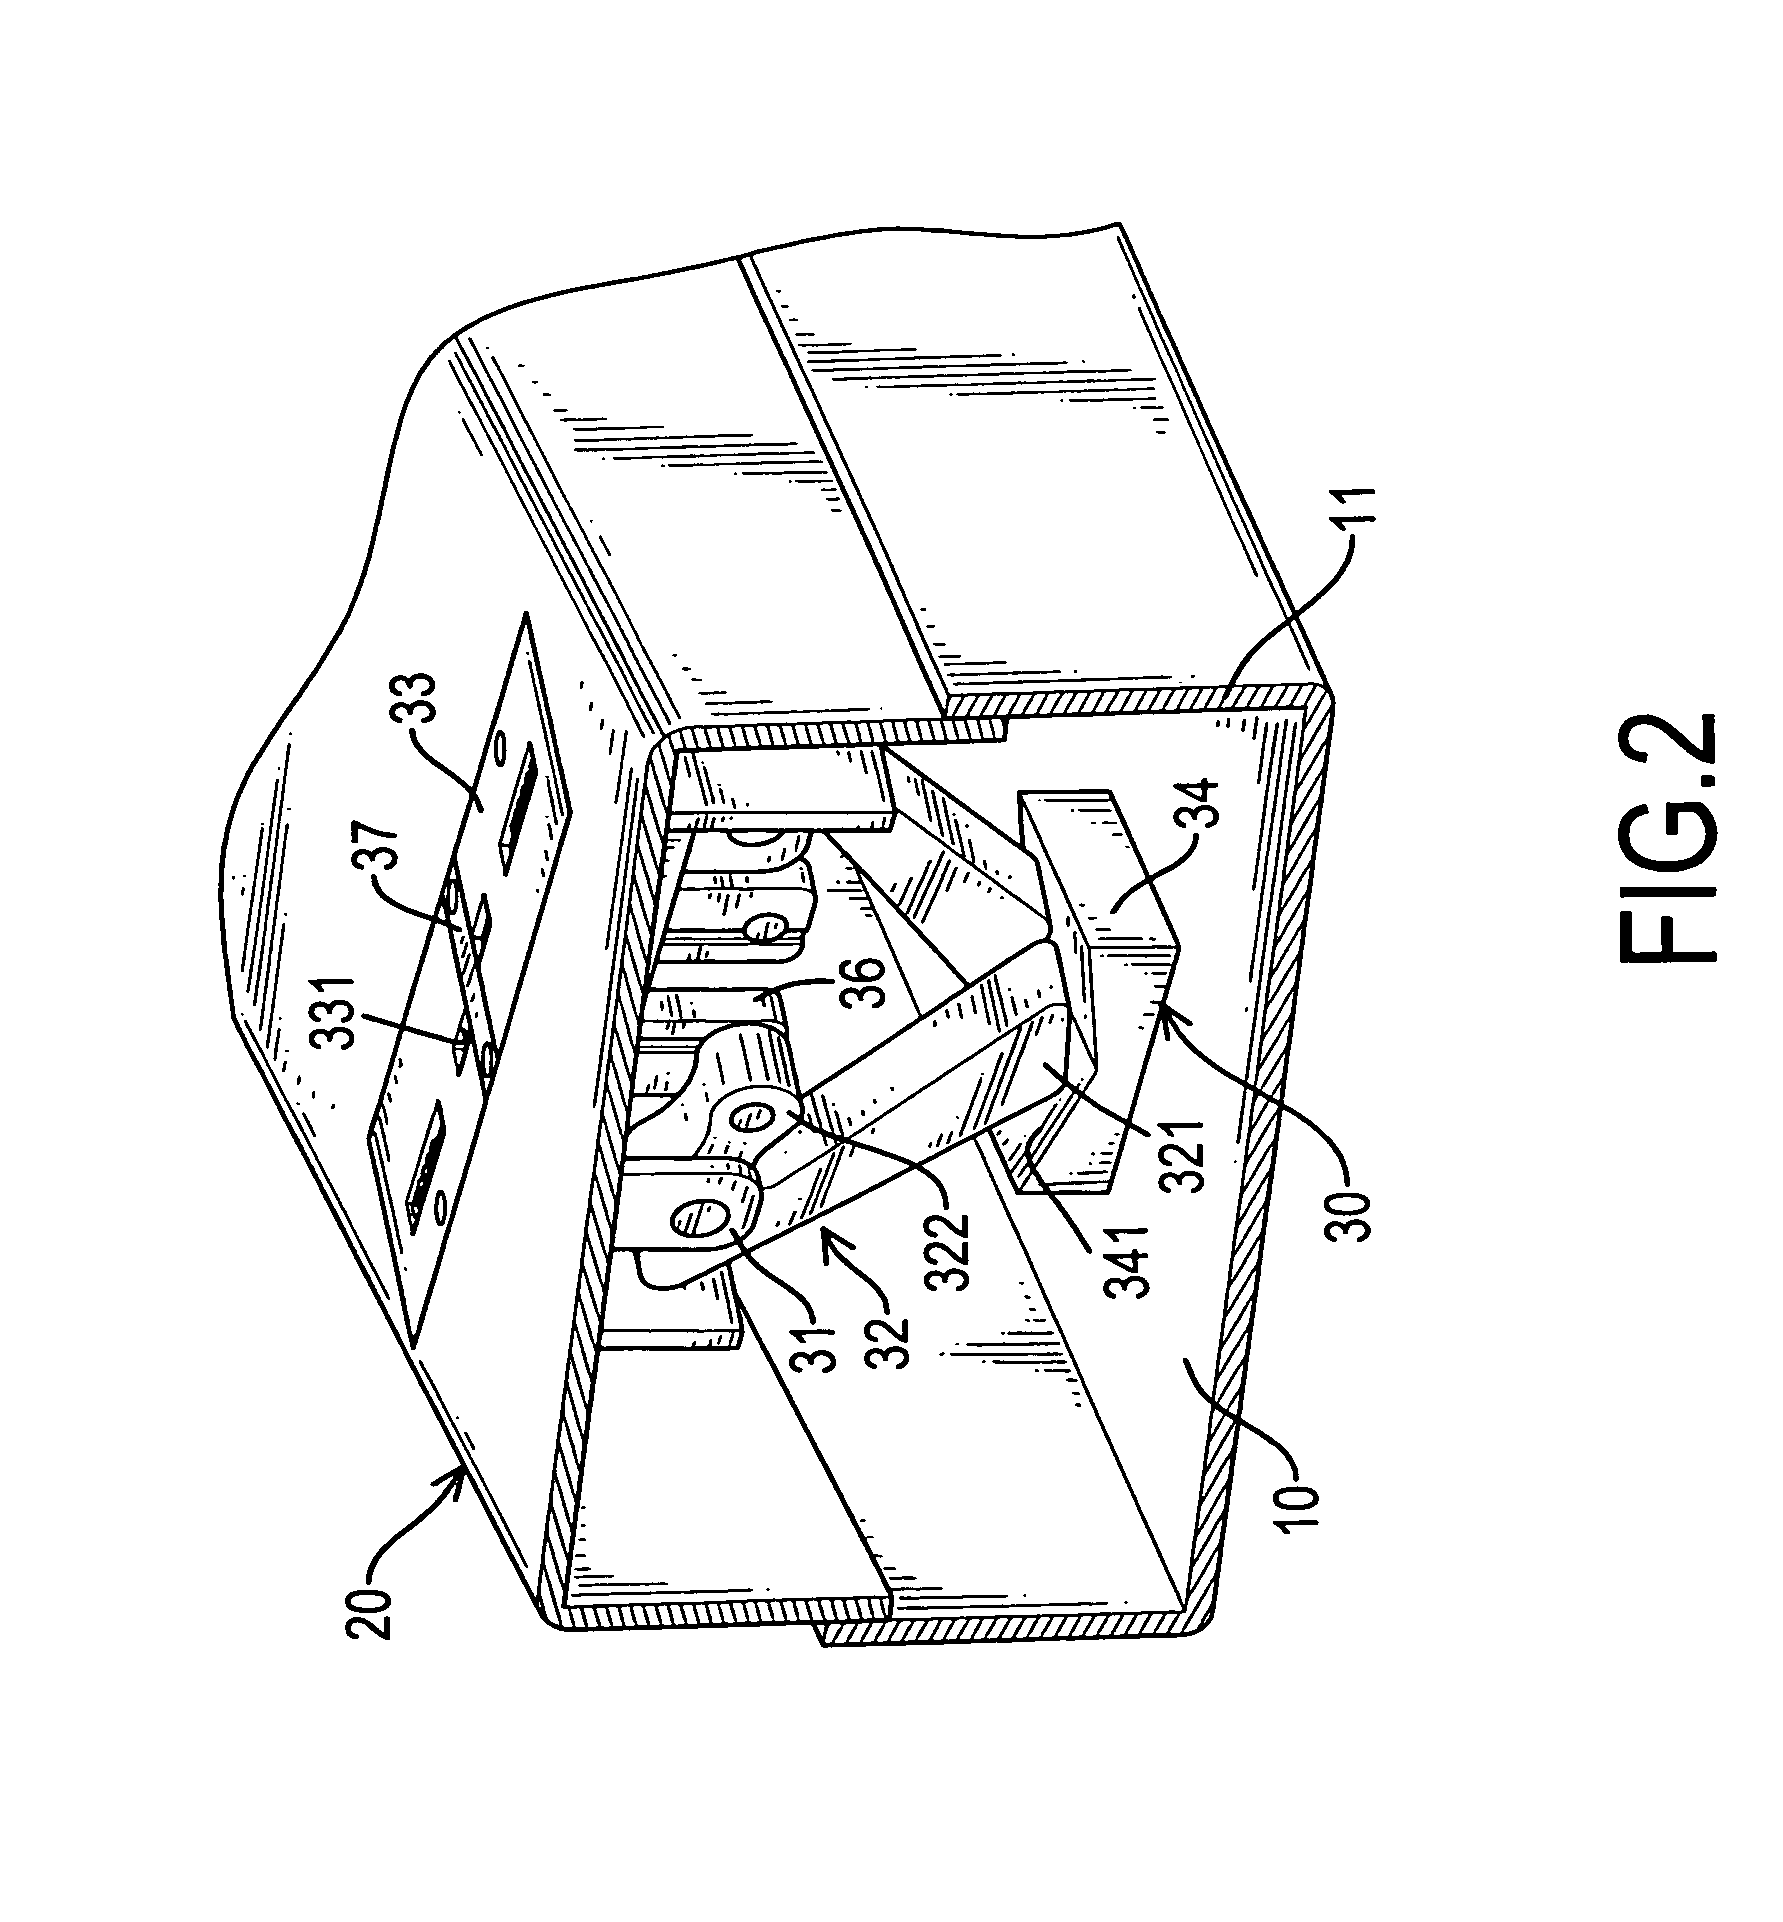 Stapler with a leg-cutting device